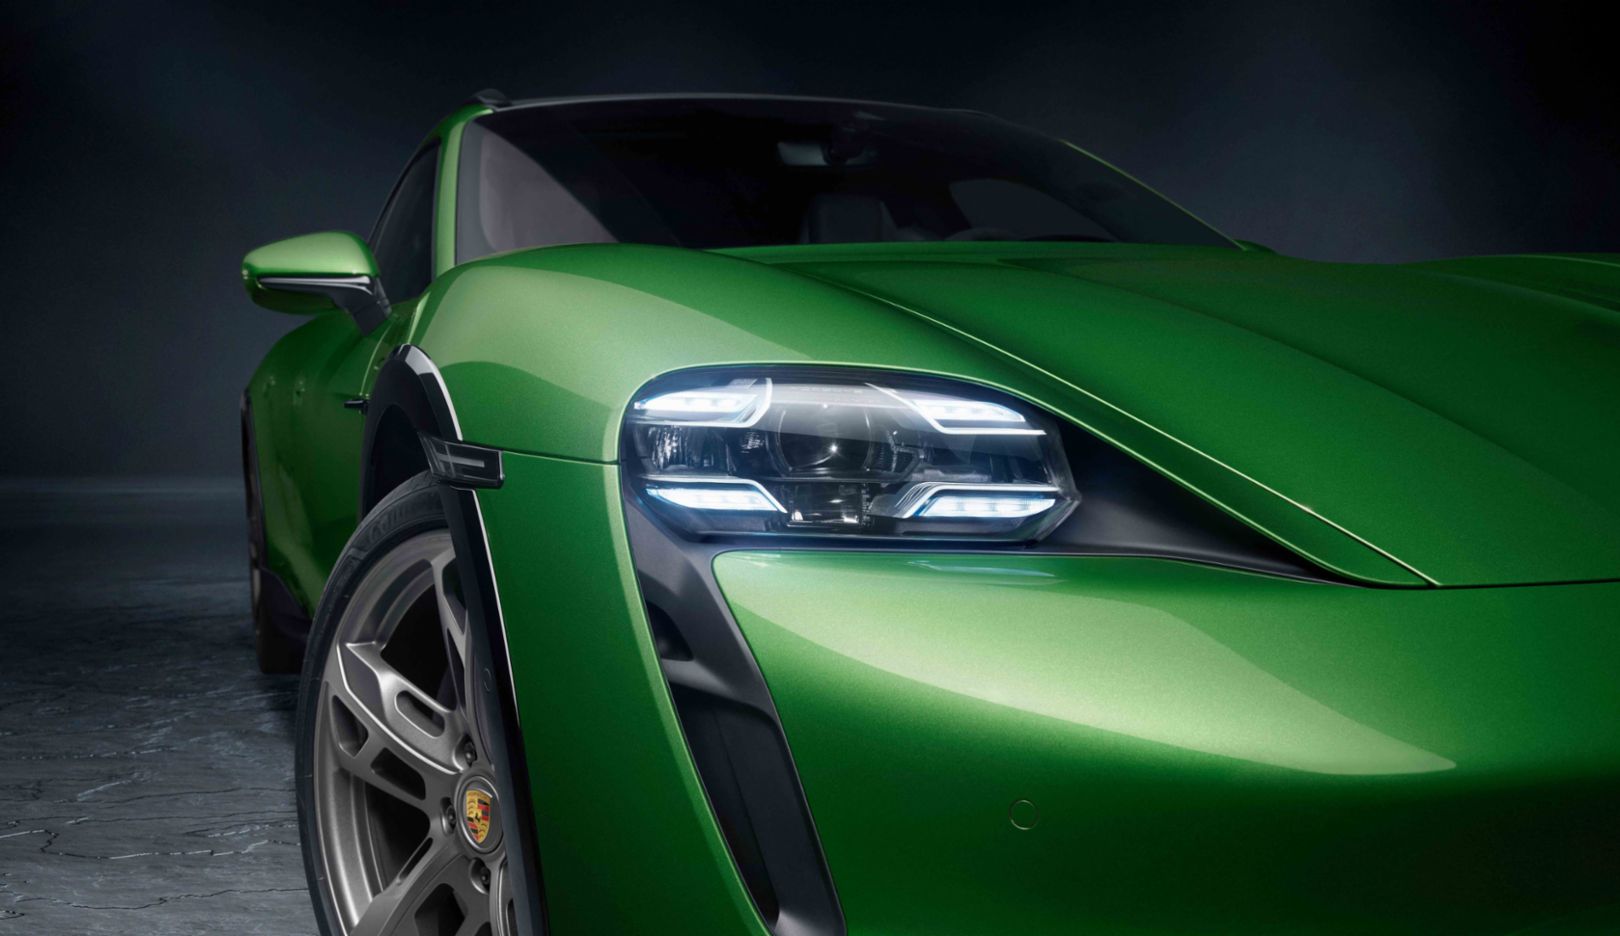 Striking appearance: Not only the vertical air intakes and the matrix LED headlights are distinctive, but the Mamba Green Metallic paint definitely stands out. 